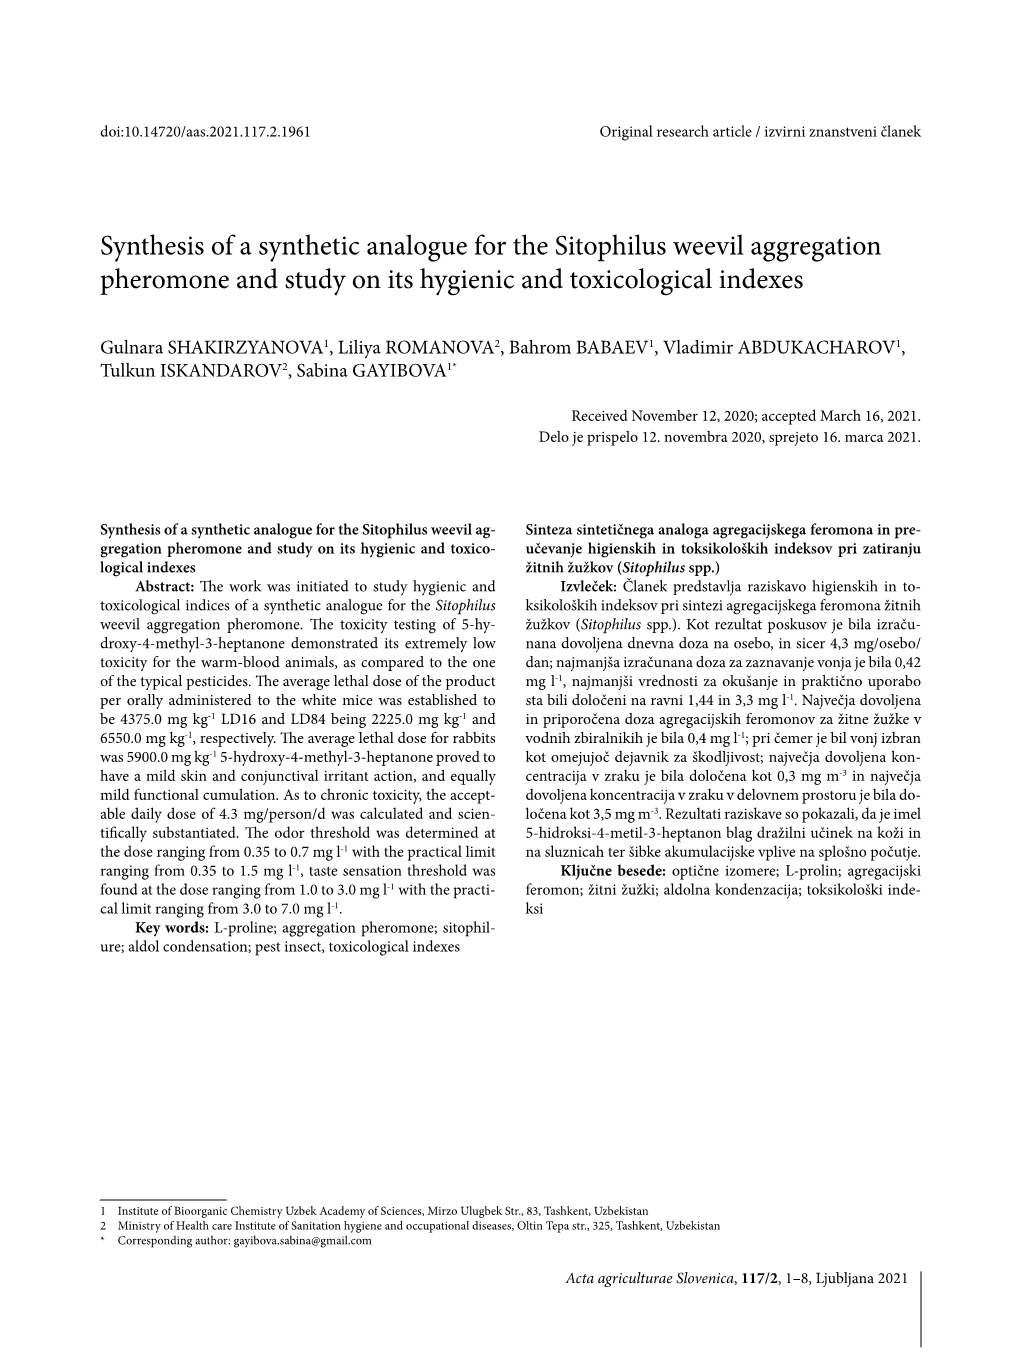 Synthesis of a Synthetic Analogue for the Sitophilus Weevil Aggregation Pheromone and Study on Its Hygienic and Toxicological Indexes